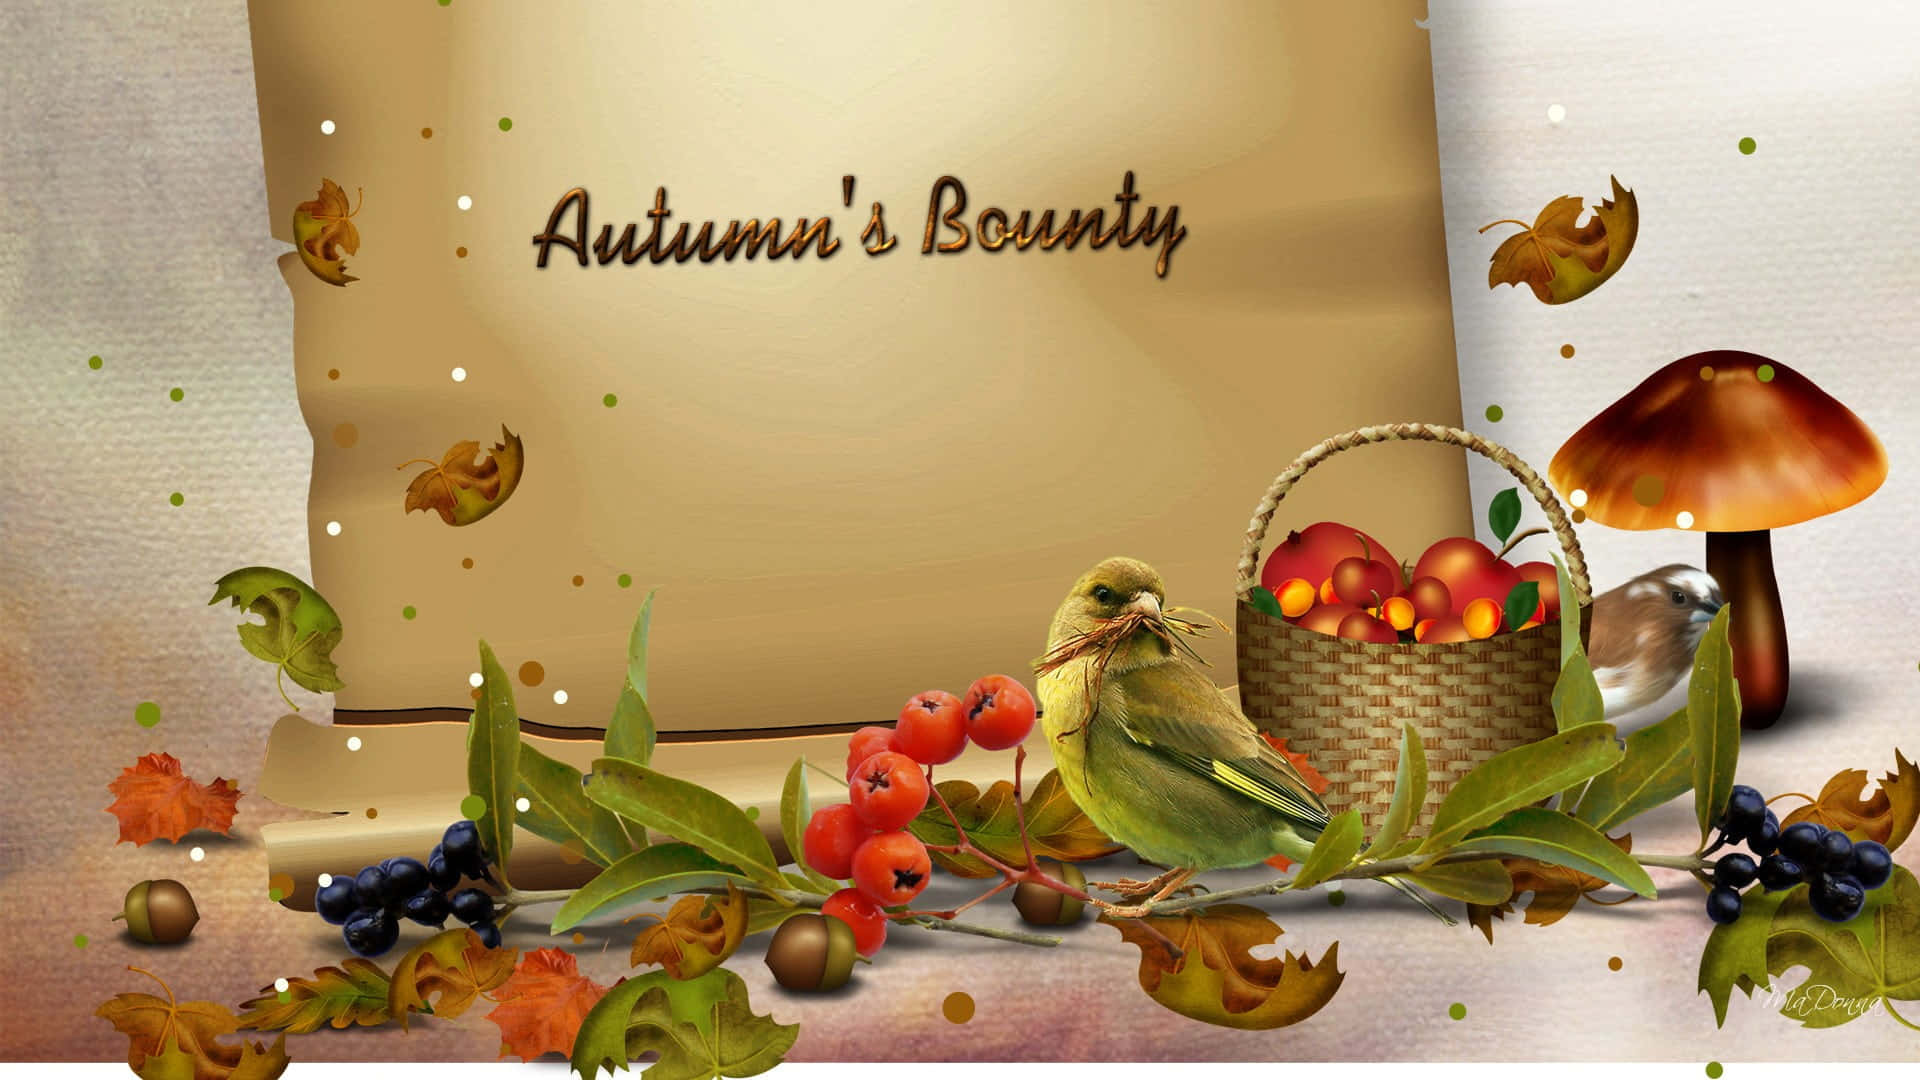 "Autumn Harvest in the Countryside" Wallpaper